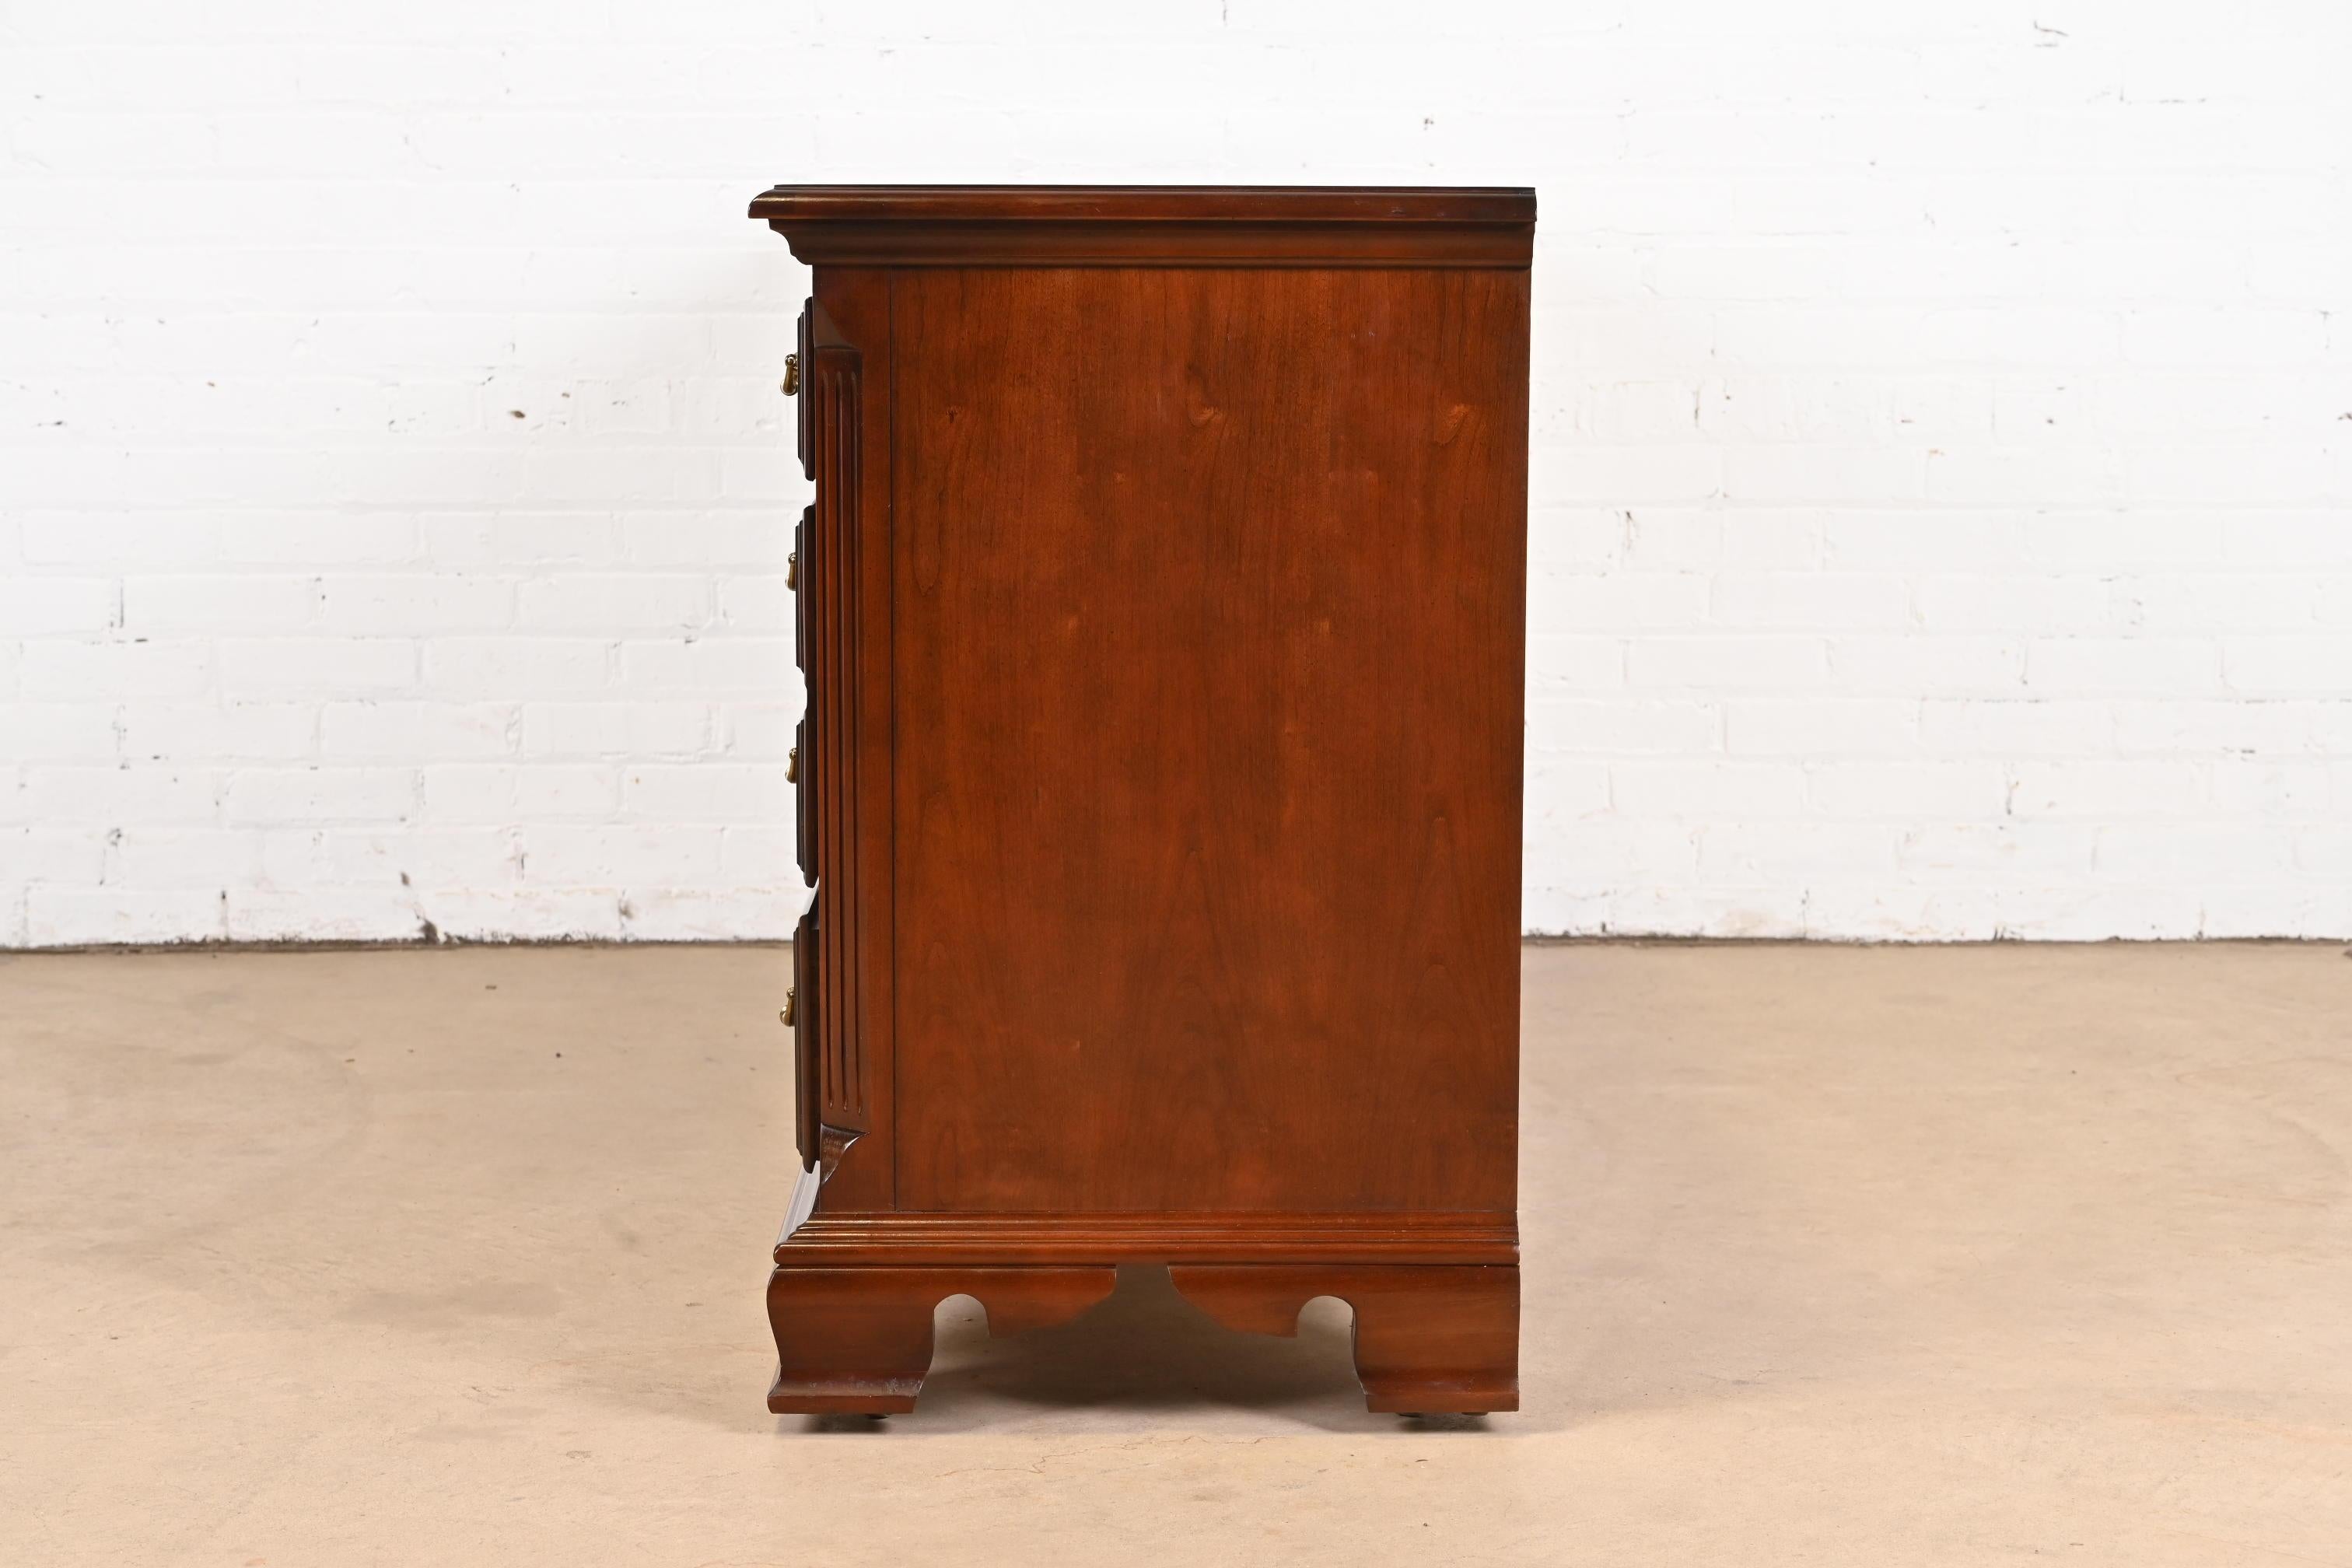 Thomasville Georgian Solid Cherry Wood Dresser or Credenza For Sale 7